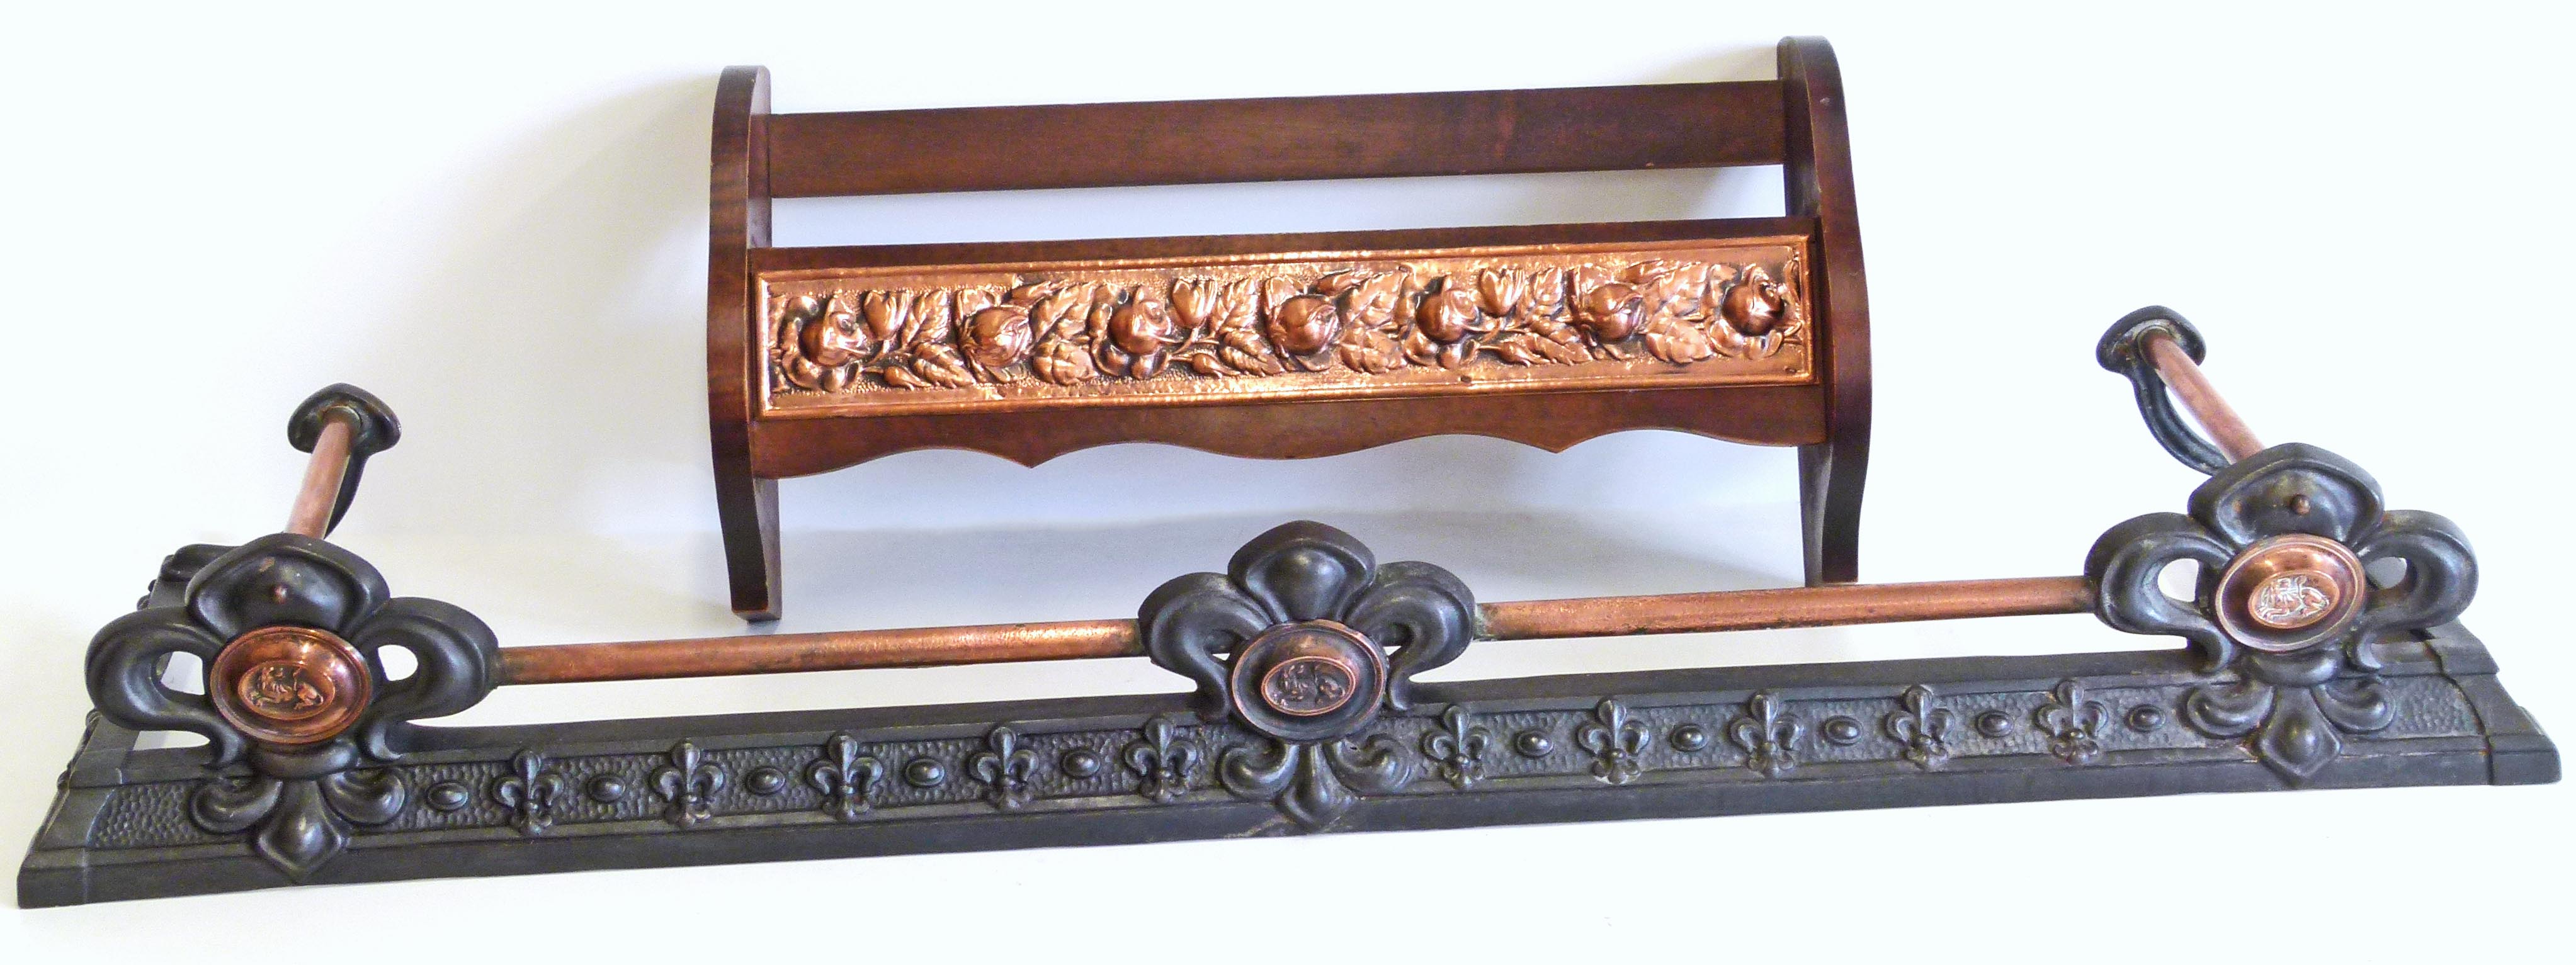 Copper and cast iron fire fender, also a wall shelf with embossed copper panel.